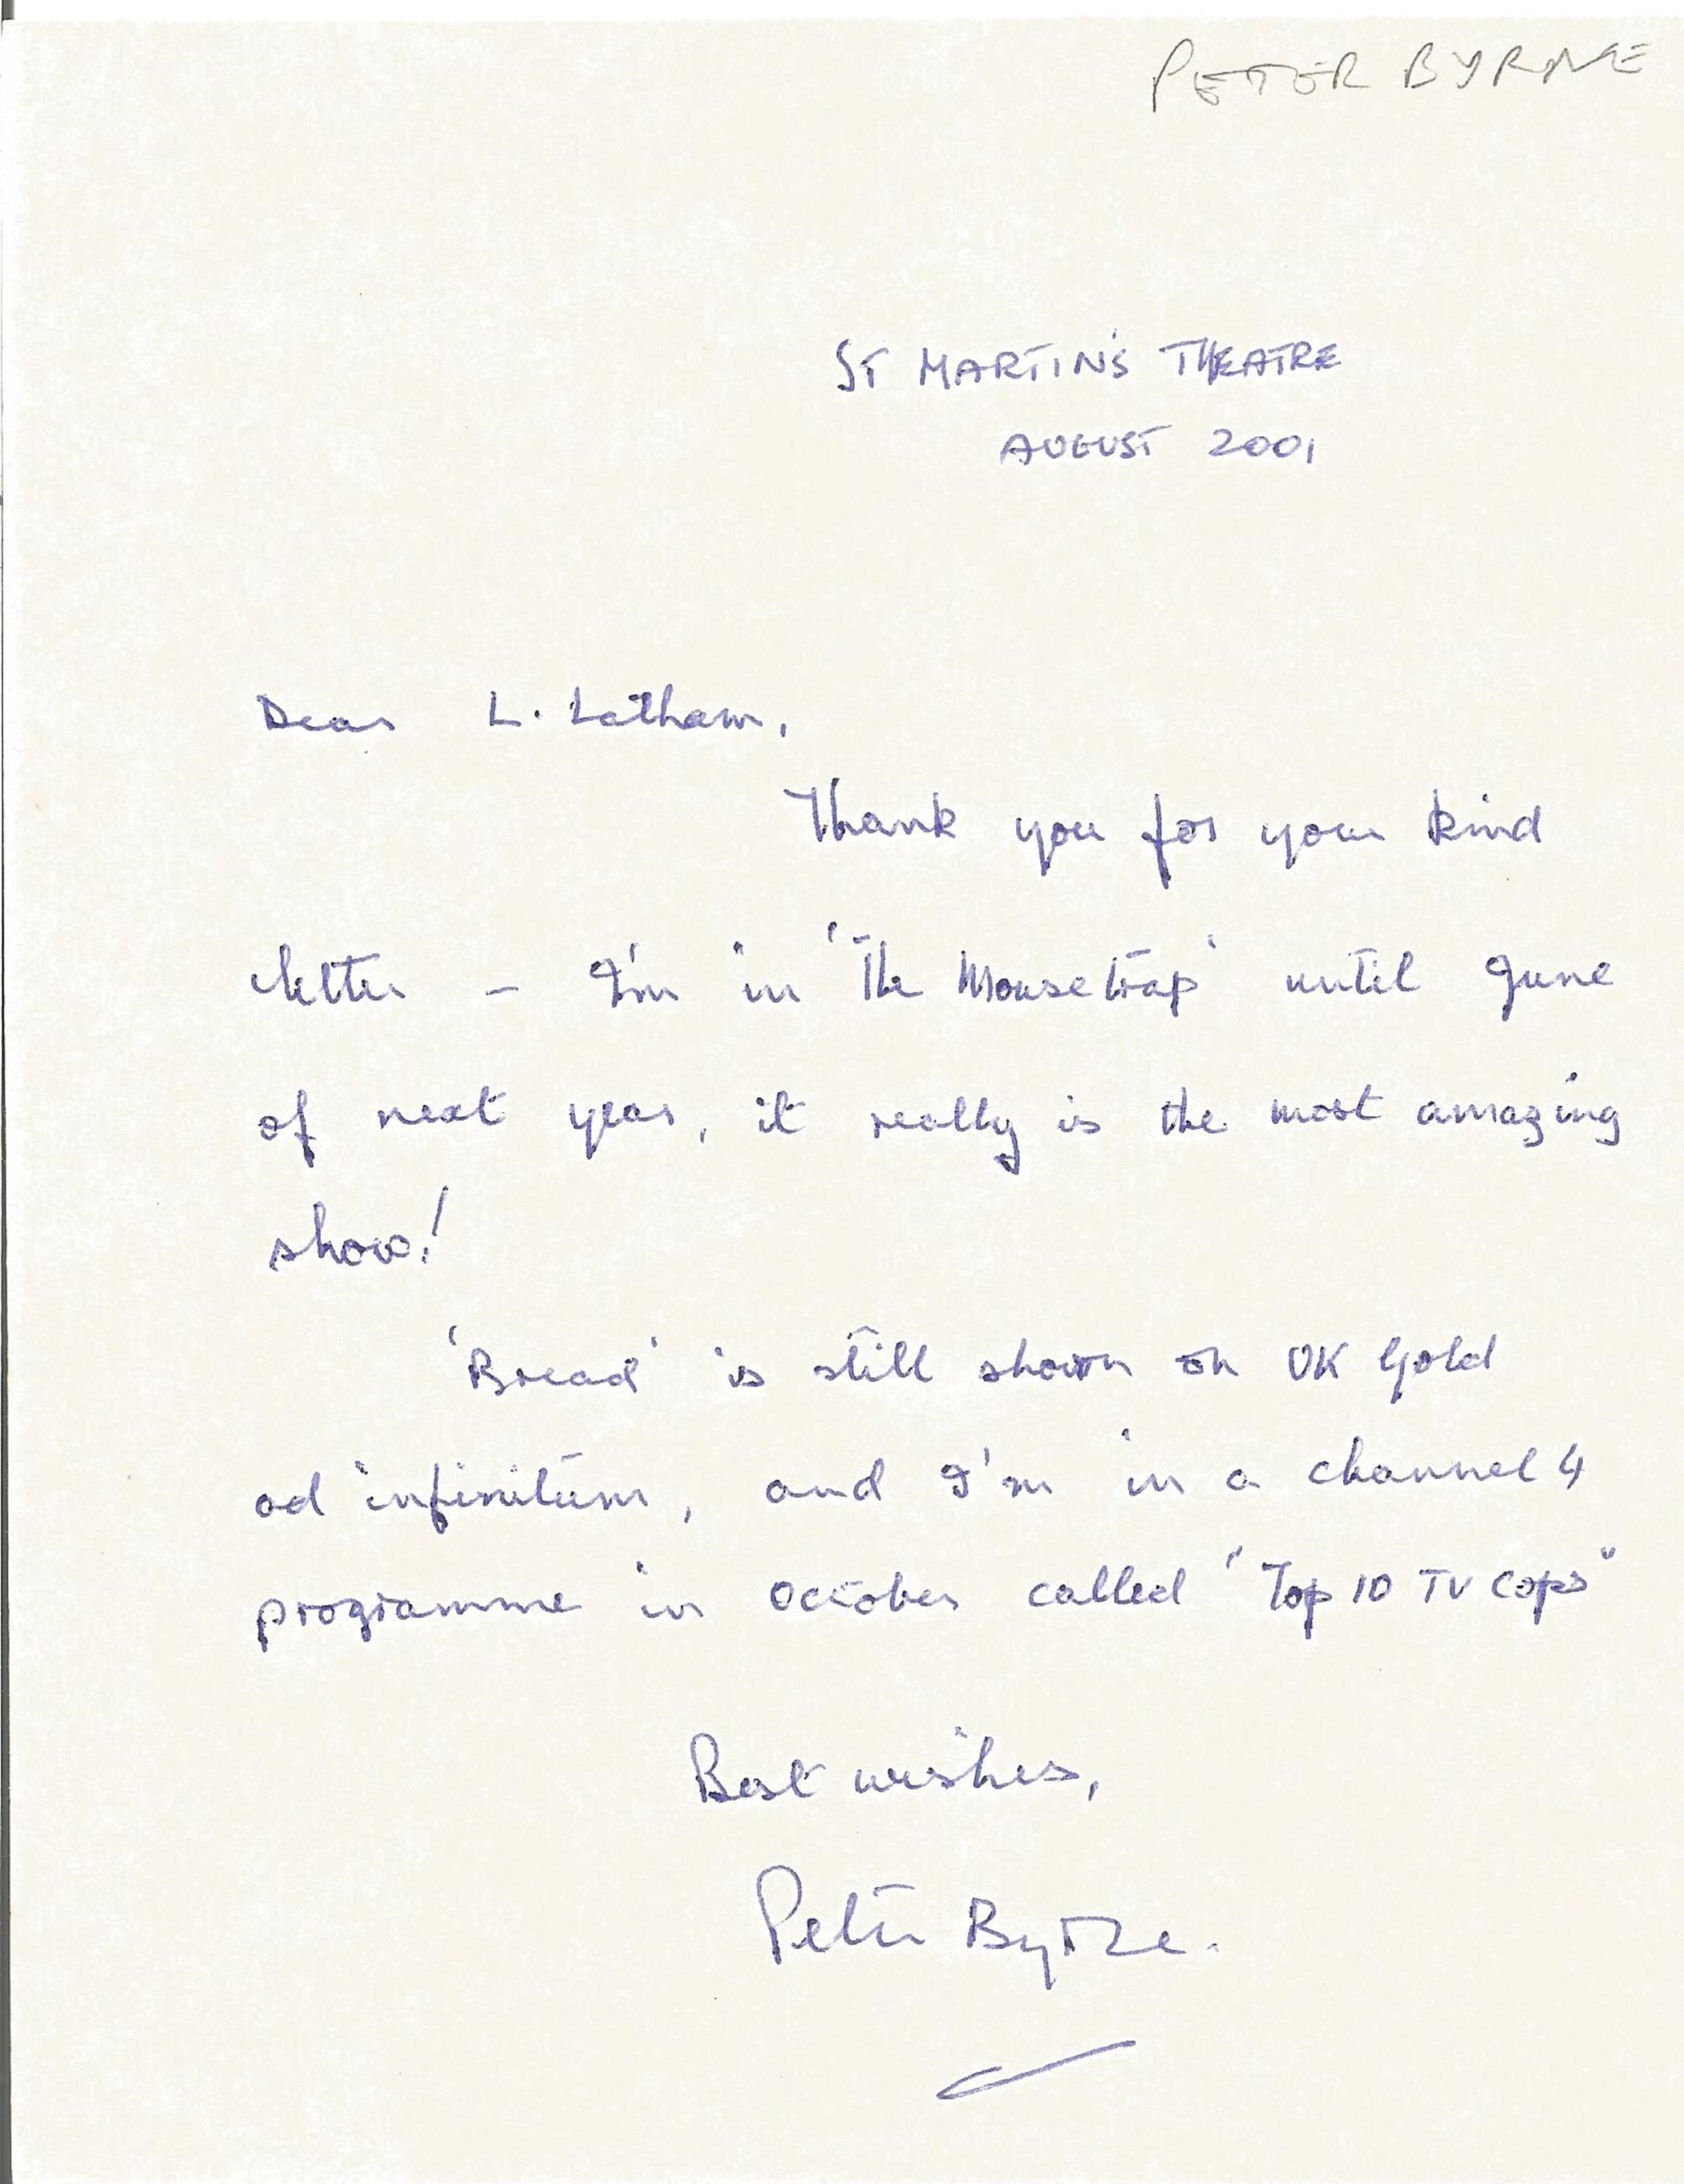 Actor Peter Byrne signed handwritten letter advising his current work commitments. Peter James Byrne